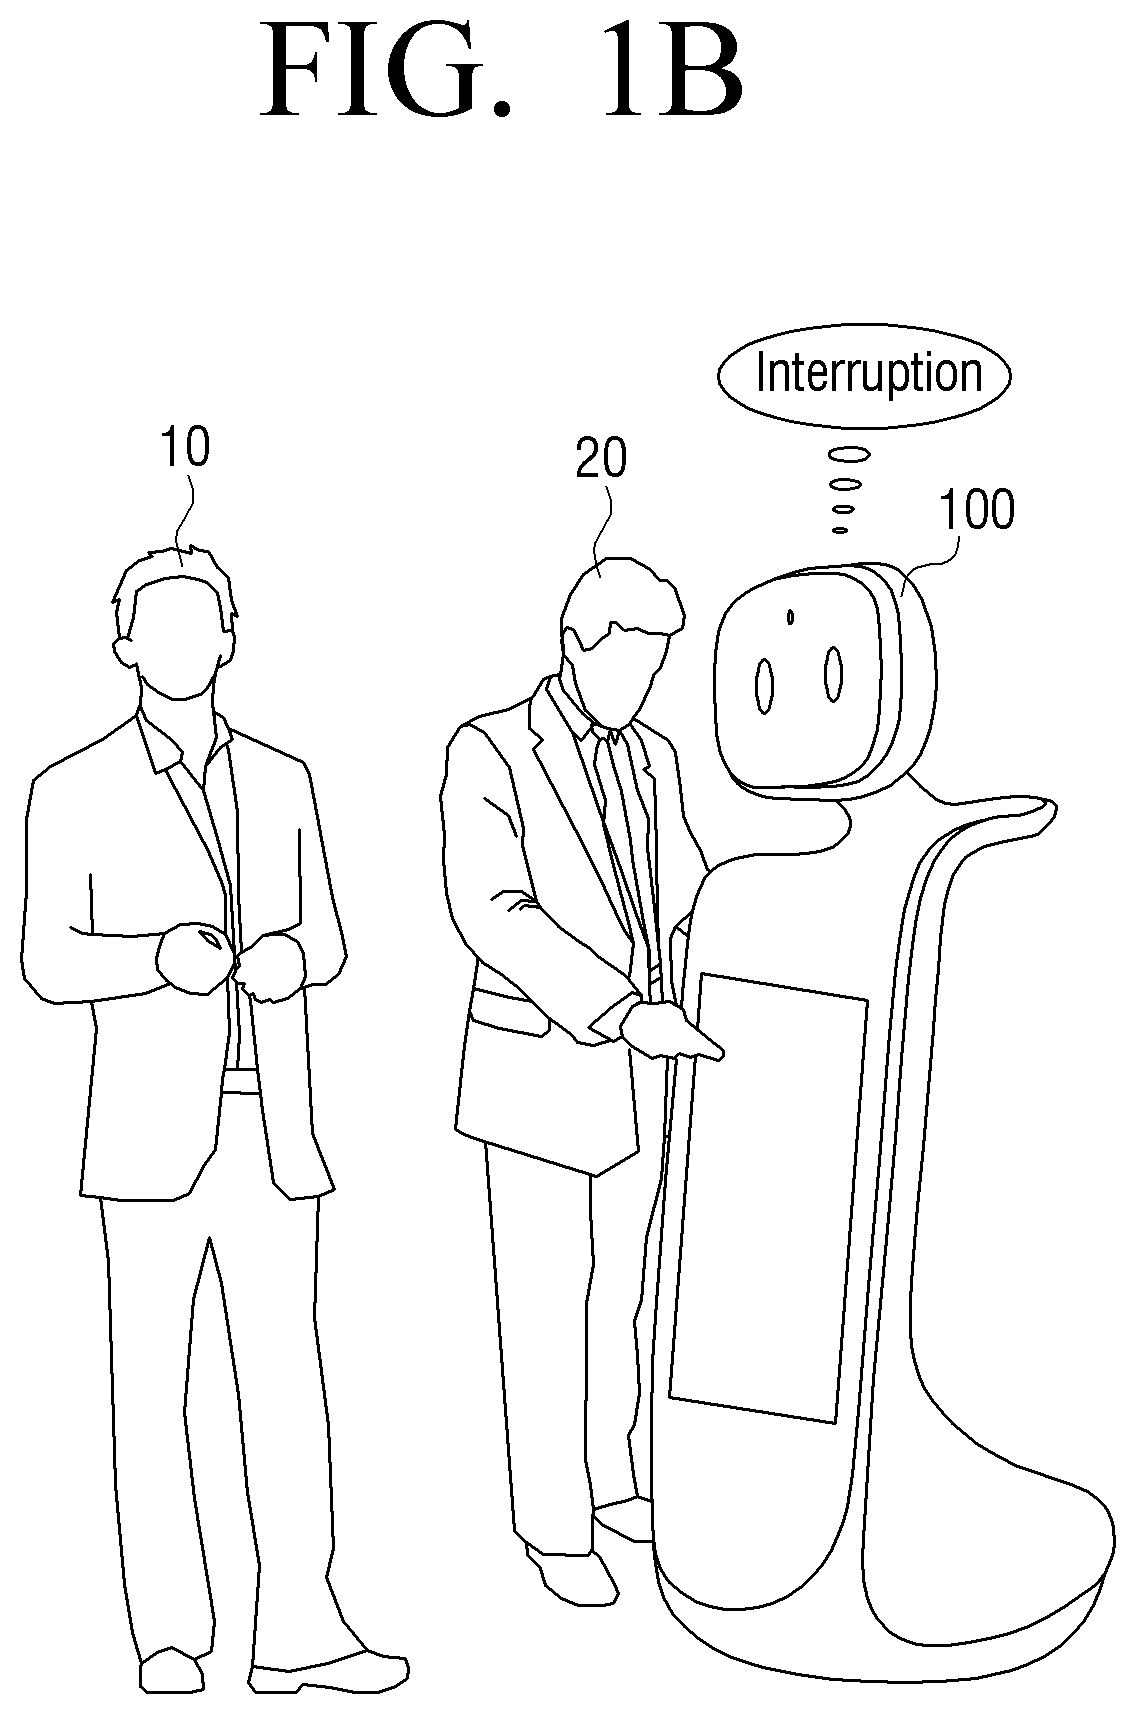 Robot for preventing interruption while interacting with user